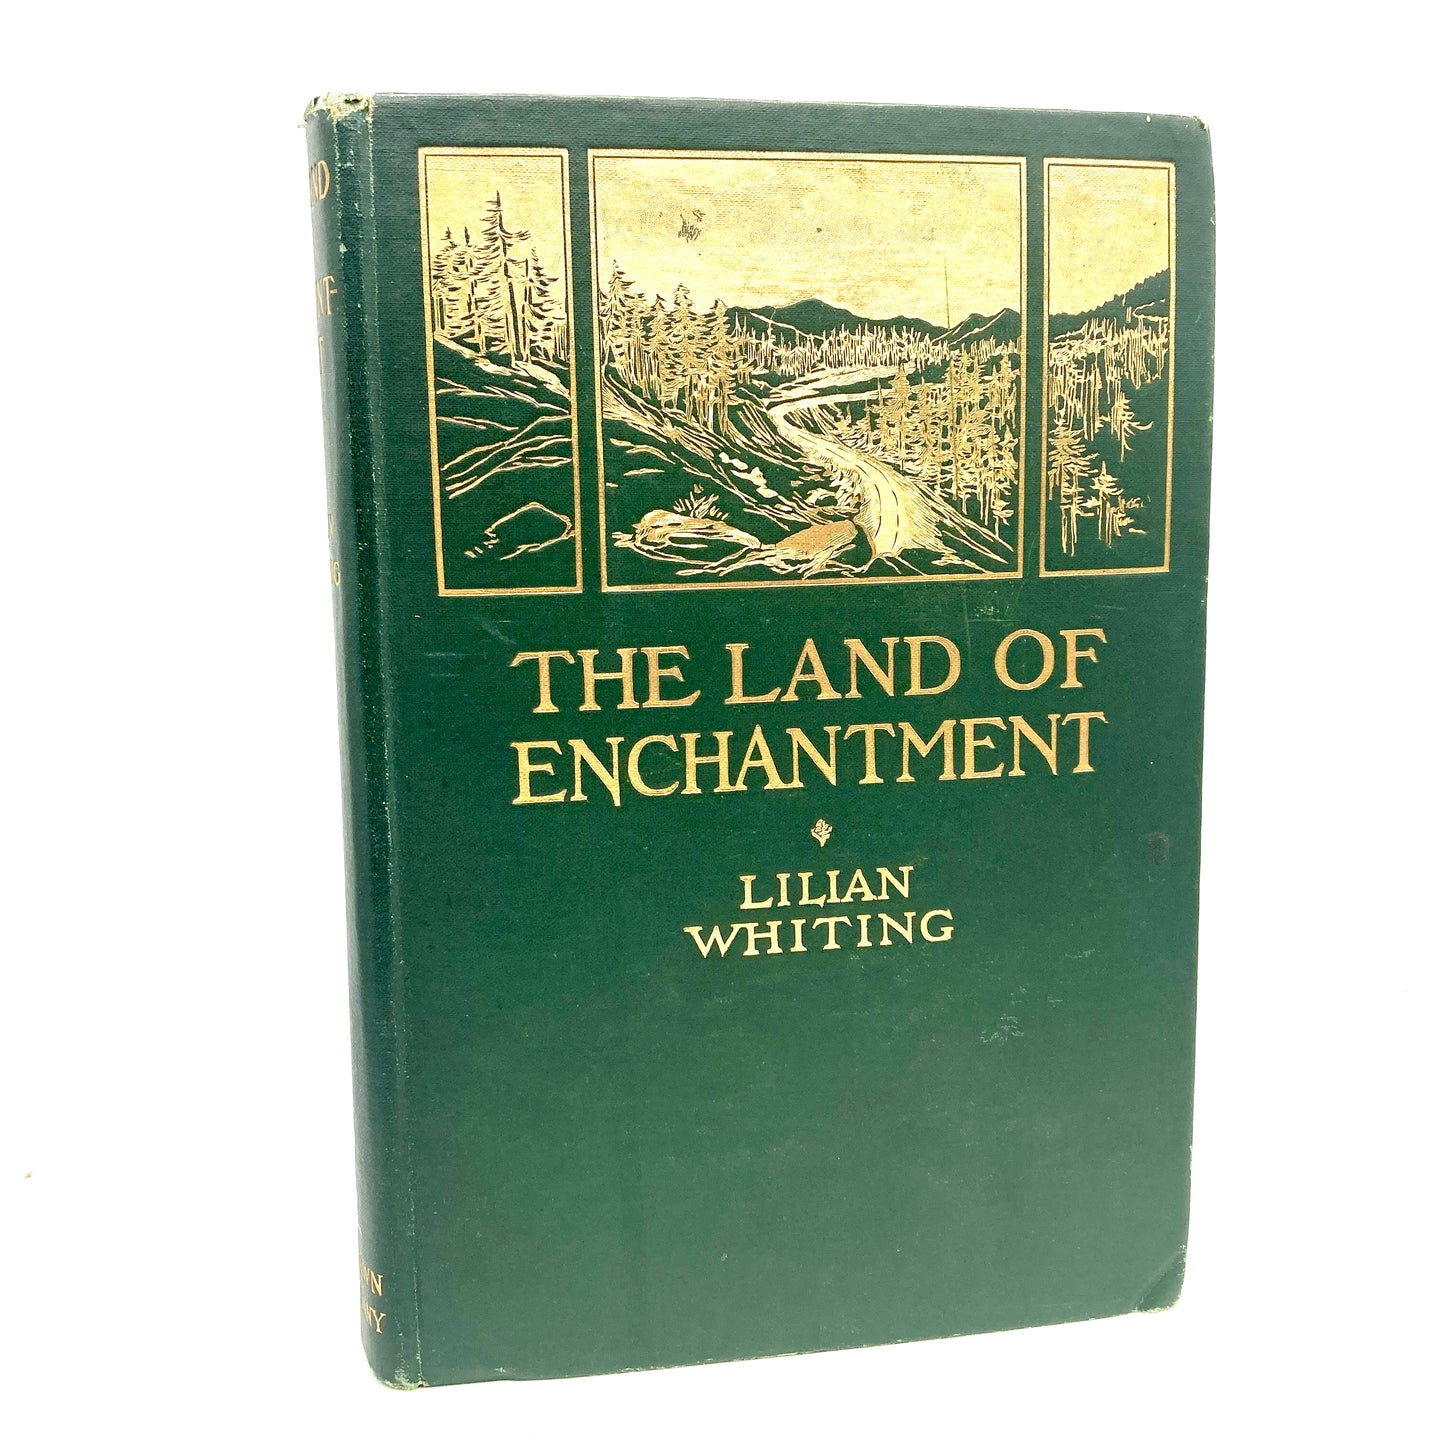 WHITING, Lilian "The Land of Enchantment" [Little, Brown & Co, 1907]